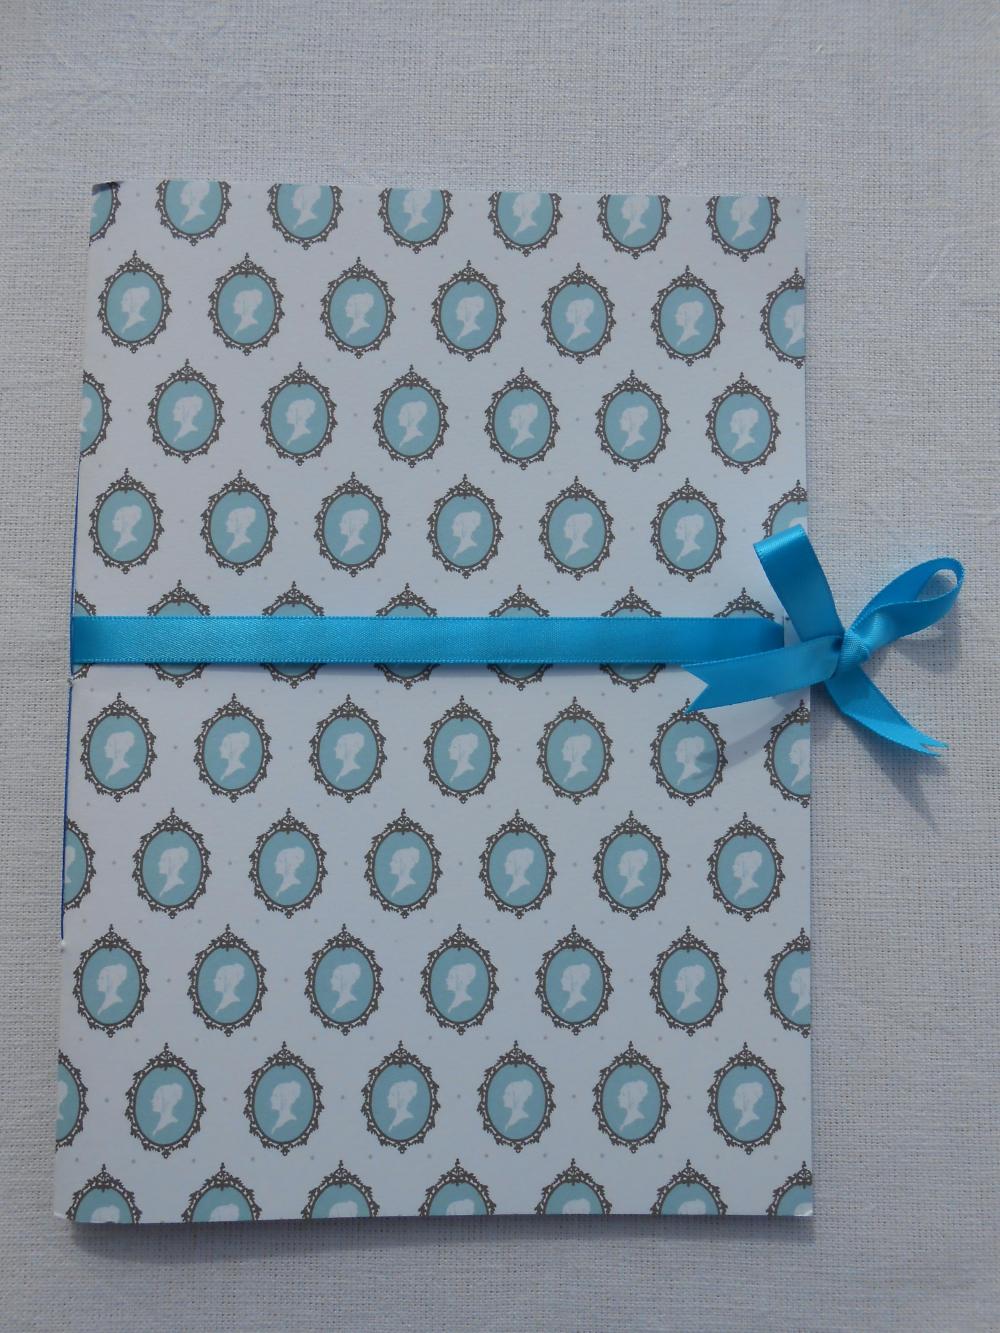 A5 Handstitched Notebook Regency Brighton Style With Cameos In Duck Egg Blue And Turquoise Ribbon